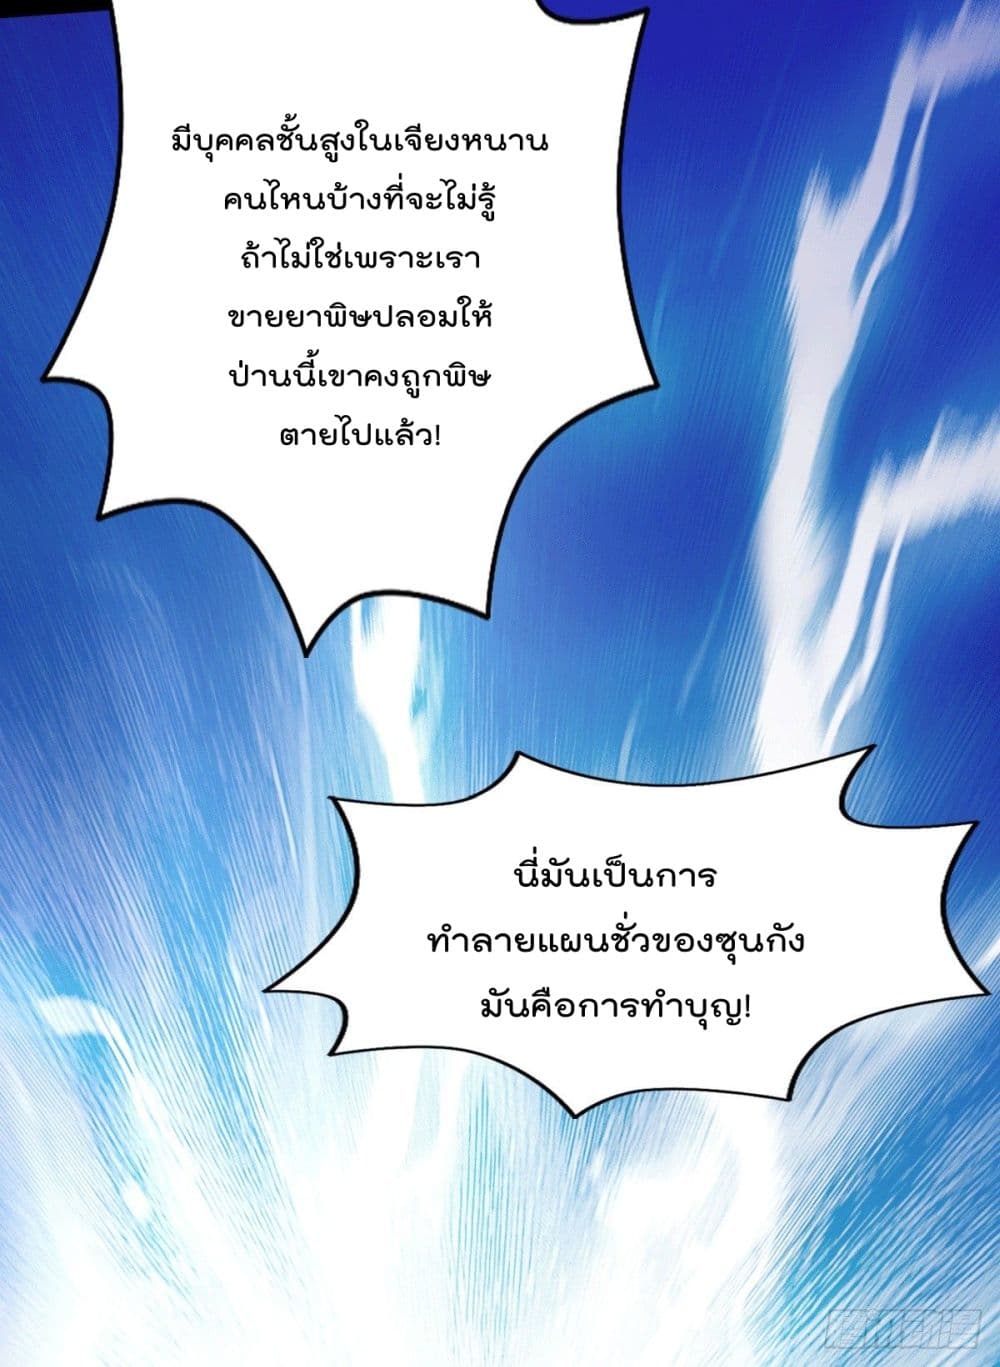 God Dragon of War in The City 46 (19)